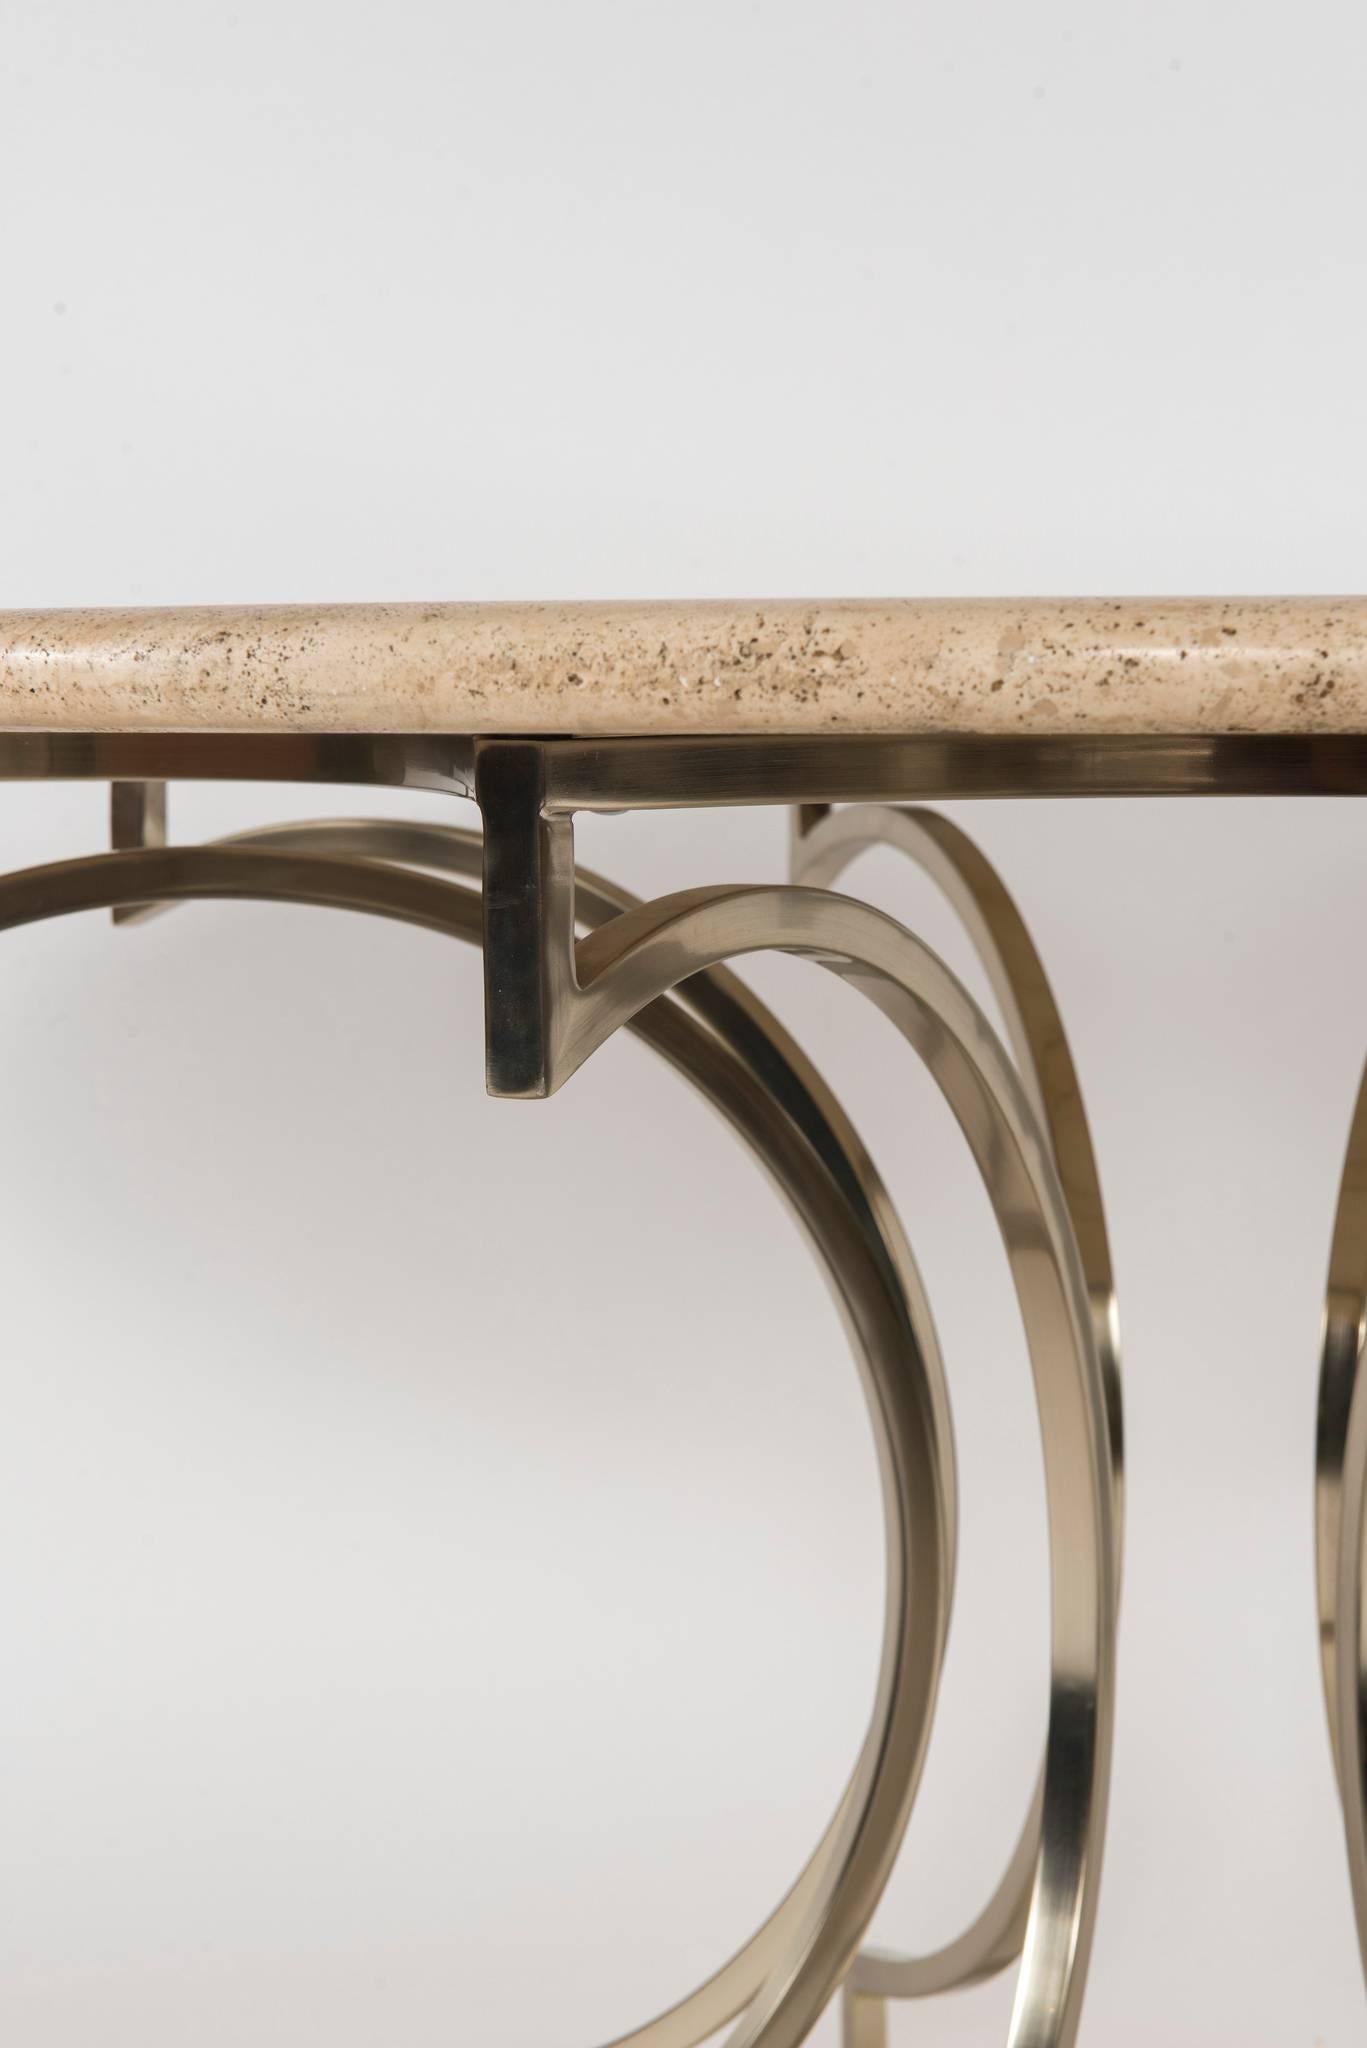 A reverse octofoil Italian steel center table base with travertine top, circa 1970.